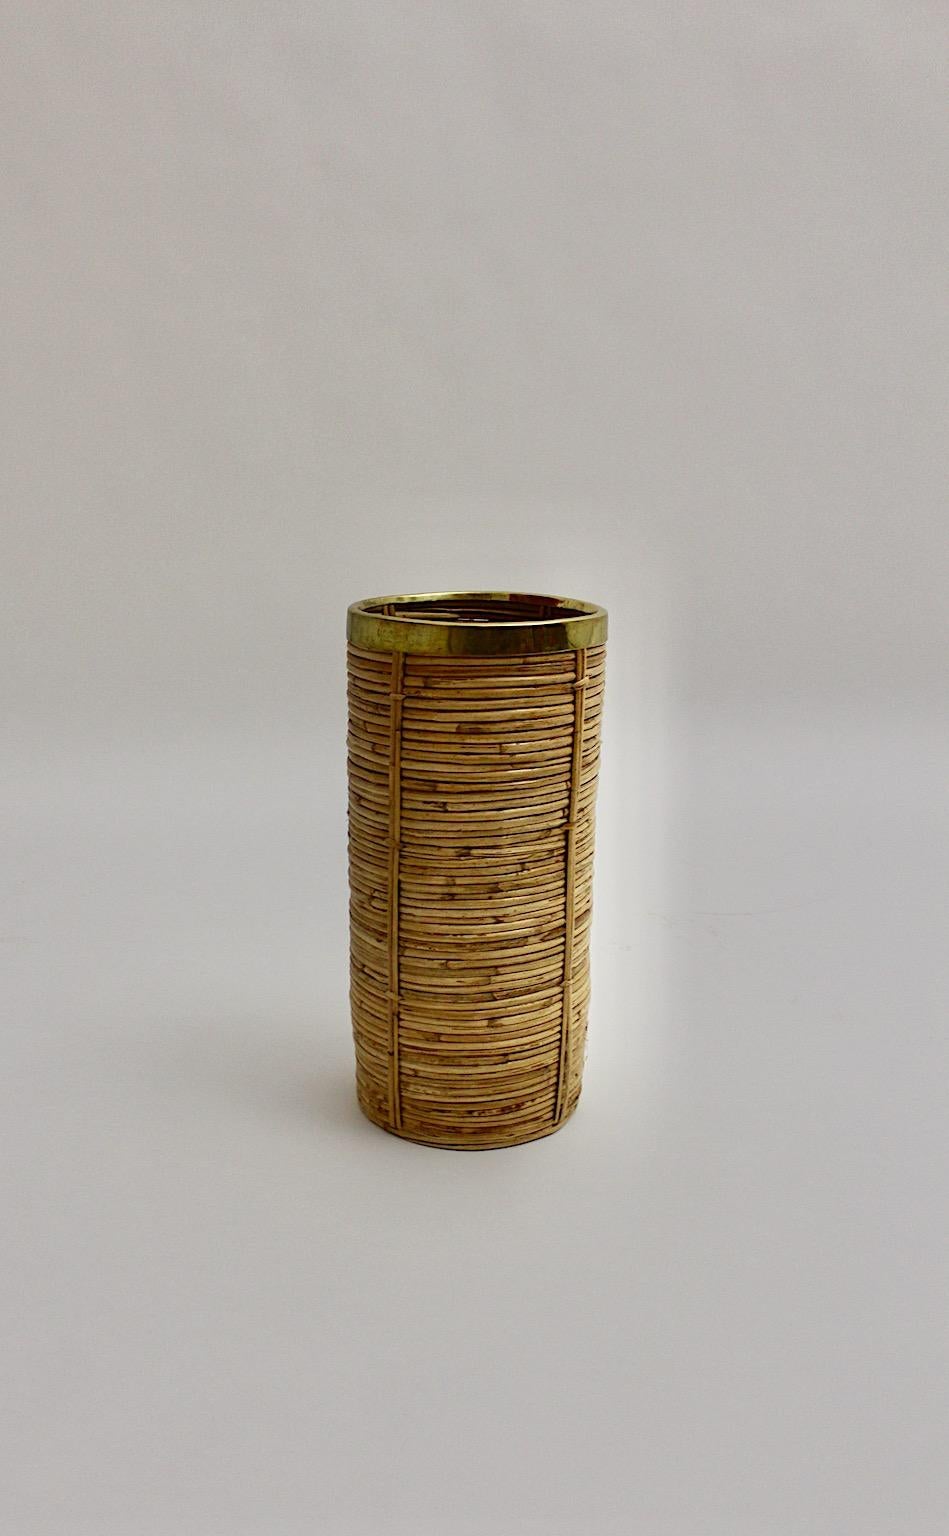 Italian Riviera Style Organic Rattan Brass Paper Basket or Cane Holder, 1970s, Italy For Sale